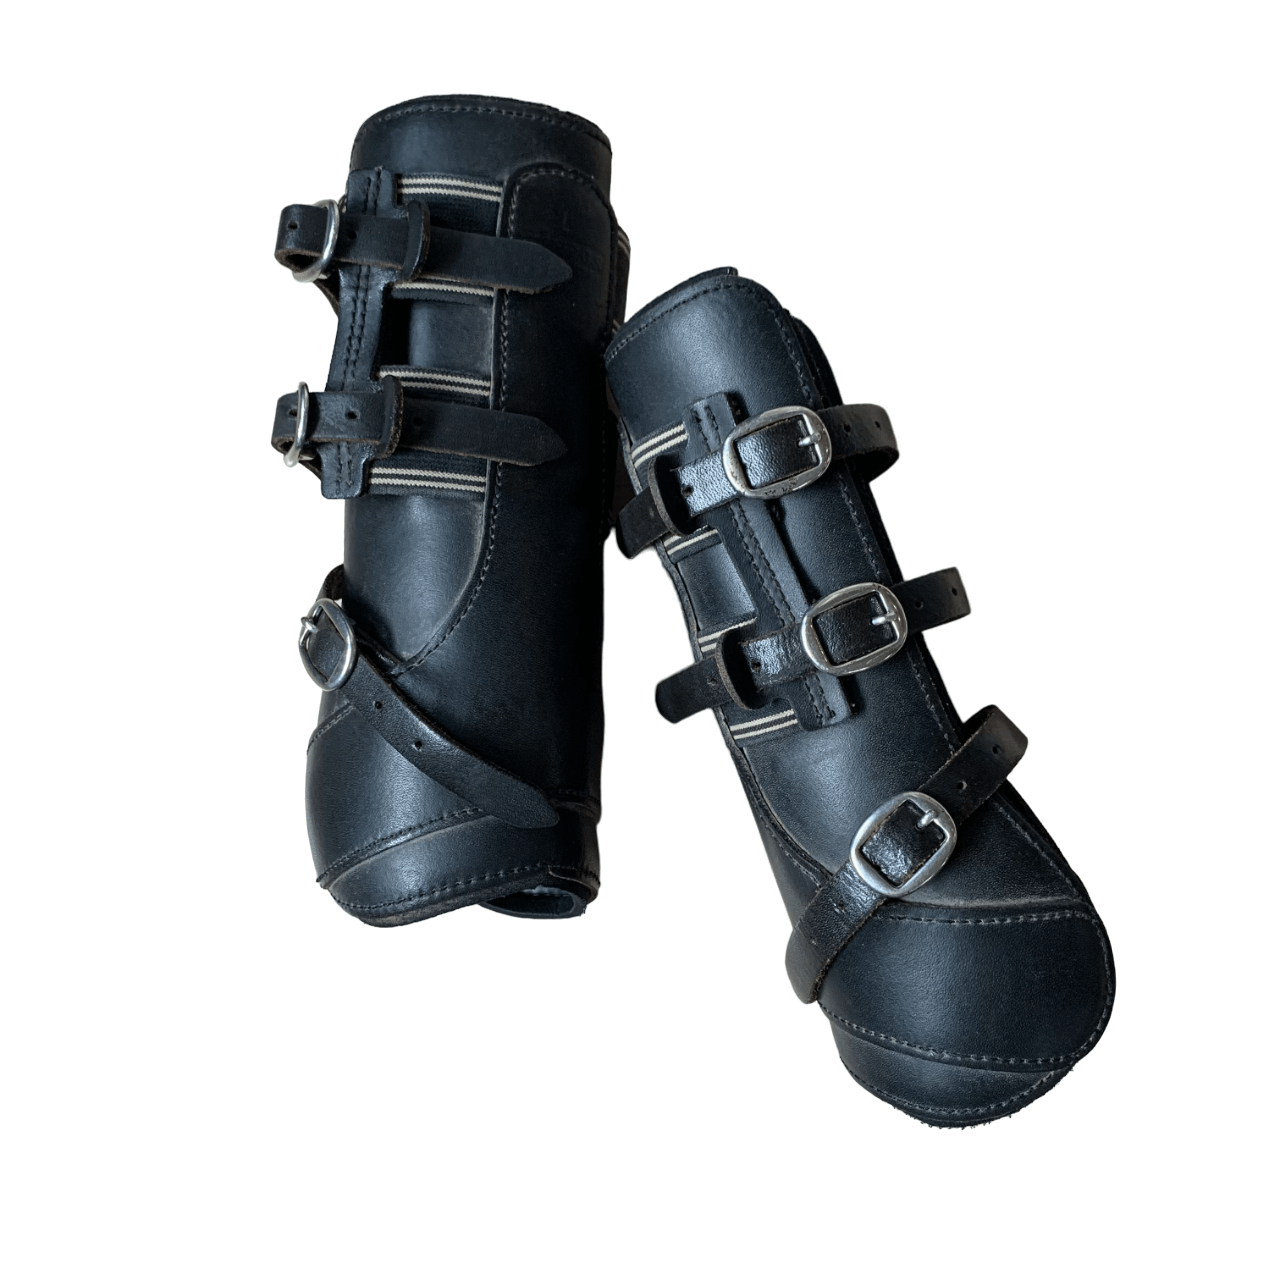 Side views of leather splint boots showing elastic and stainless steel hardware